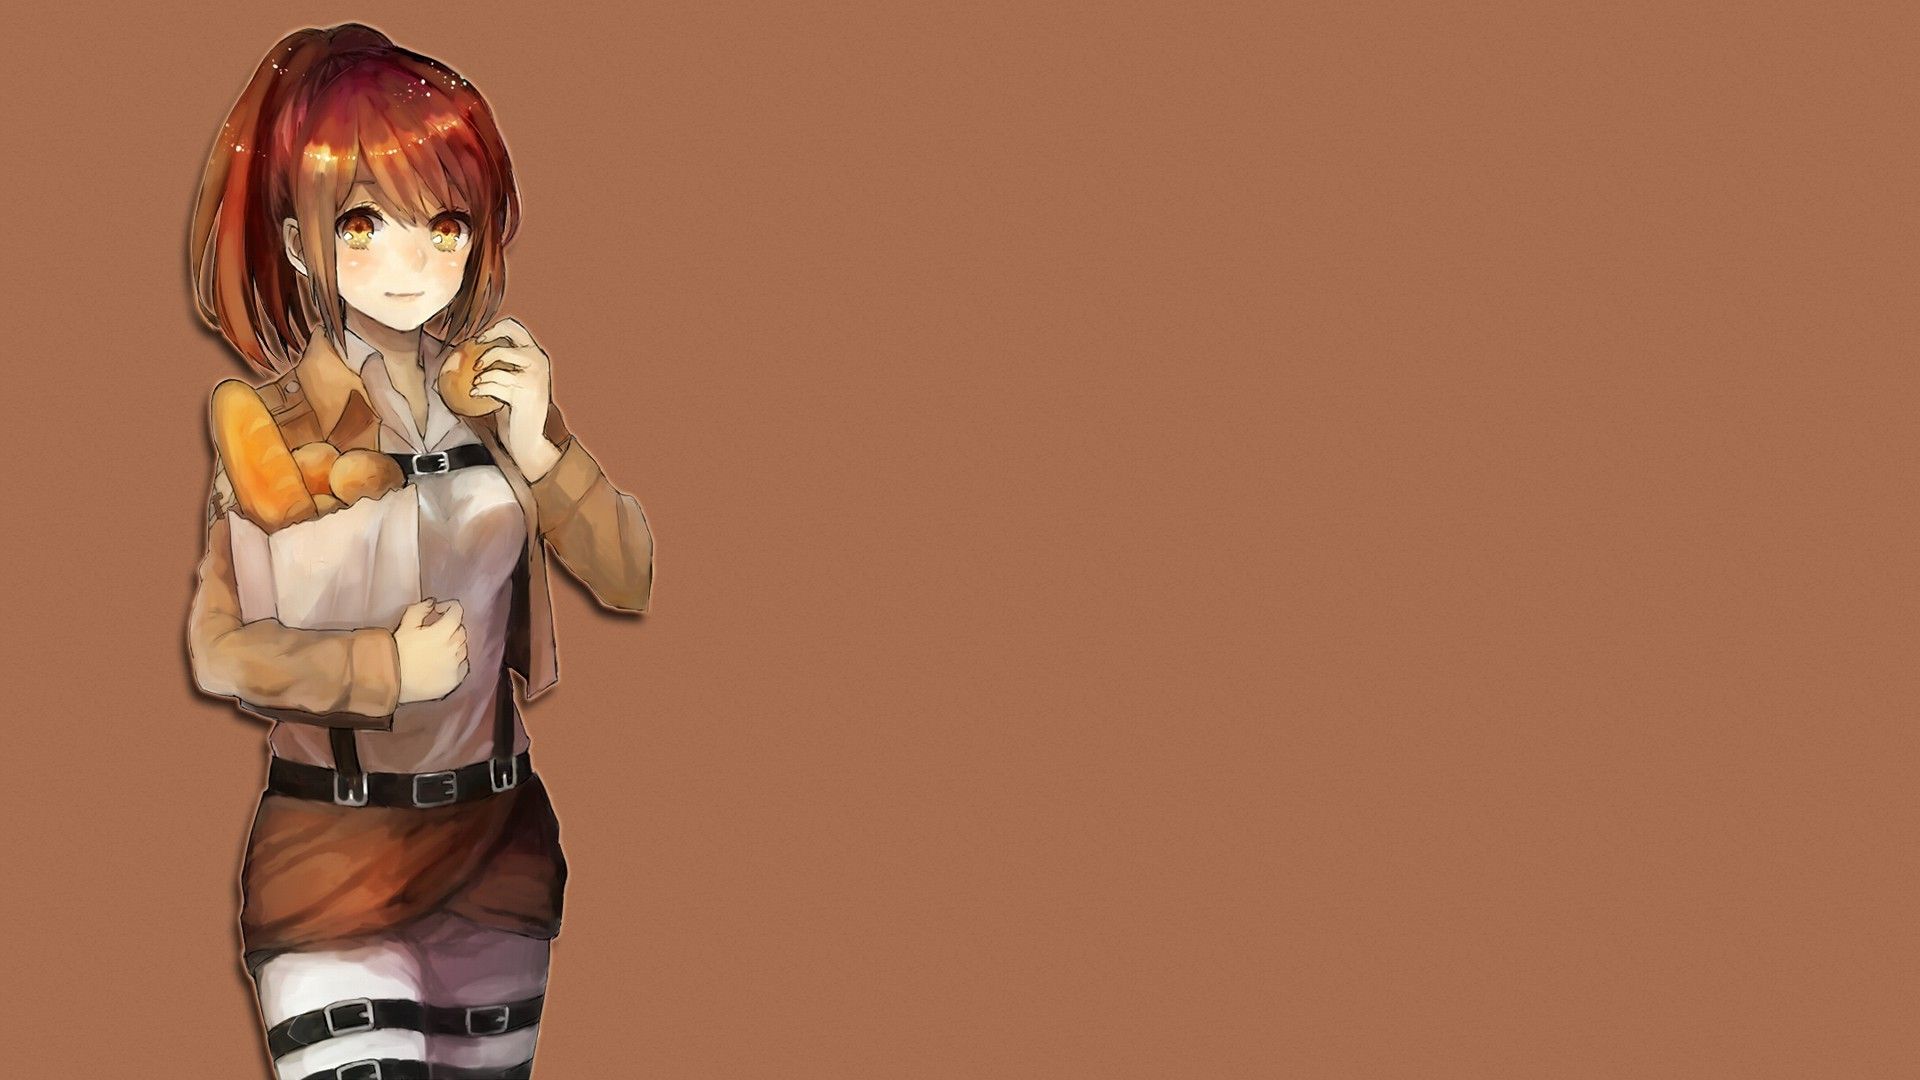 Does anyone have any good Attack on Titan wallpaper?